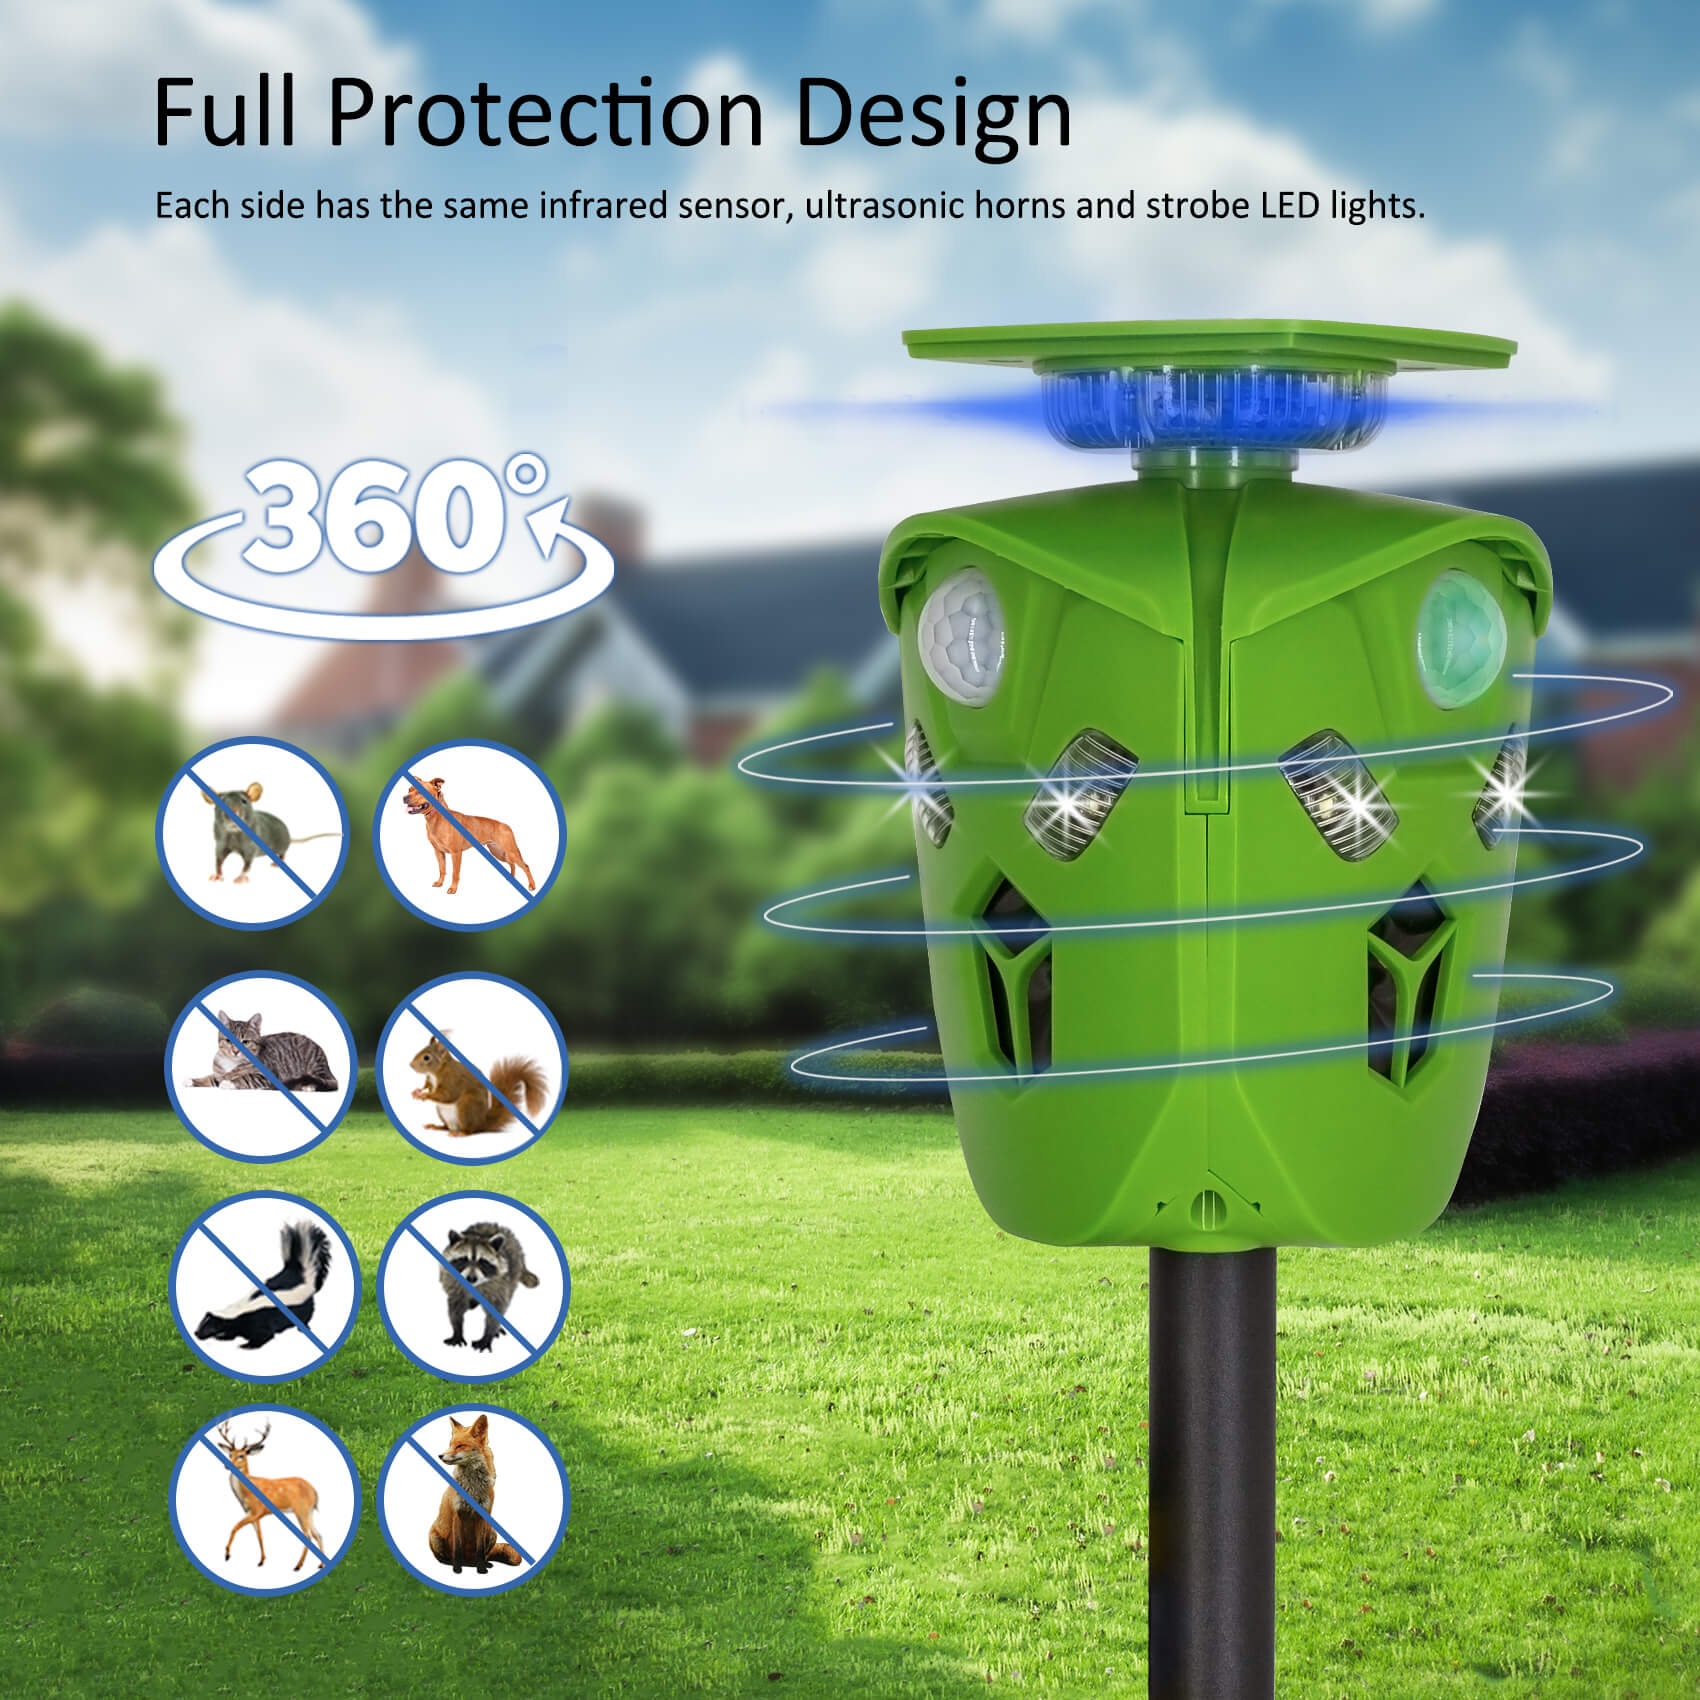 Ultrasonic Animal Repeller Solar Powered Repellent, Pest Repeller With  Motion Sensor LED Flashing Lights IPX4 Waterproof Outdoor, For Farm Garden  Patio Yard | Solar Ultrasonic Pest Repeller Outdoor Animal With Sound Motion